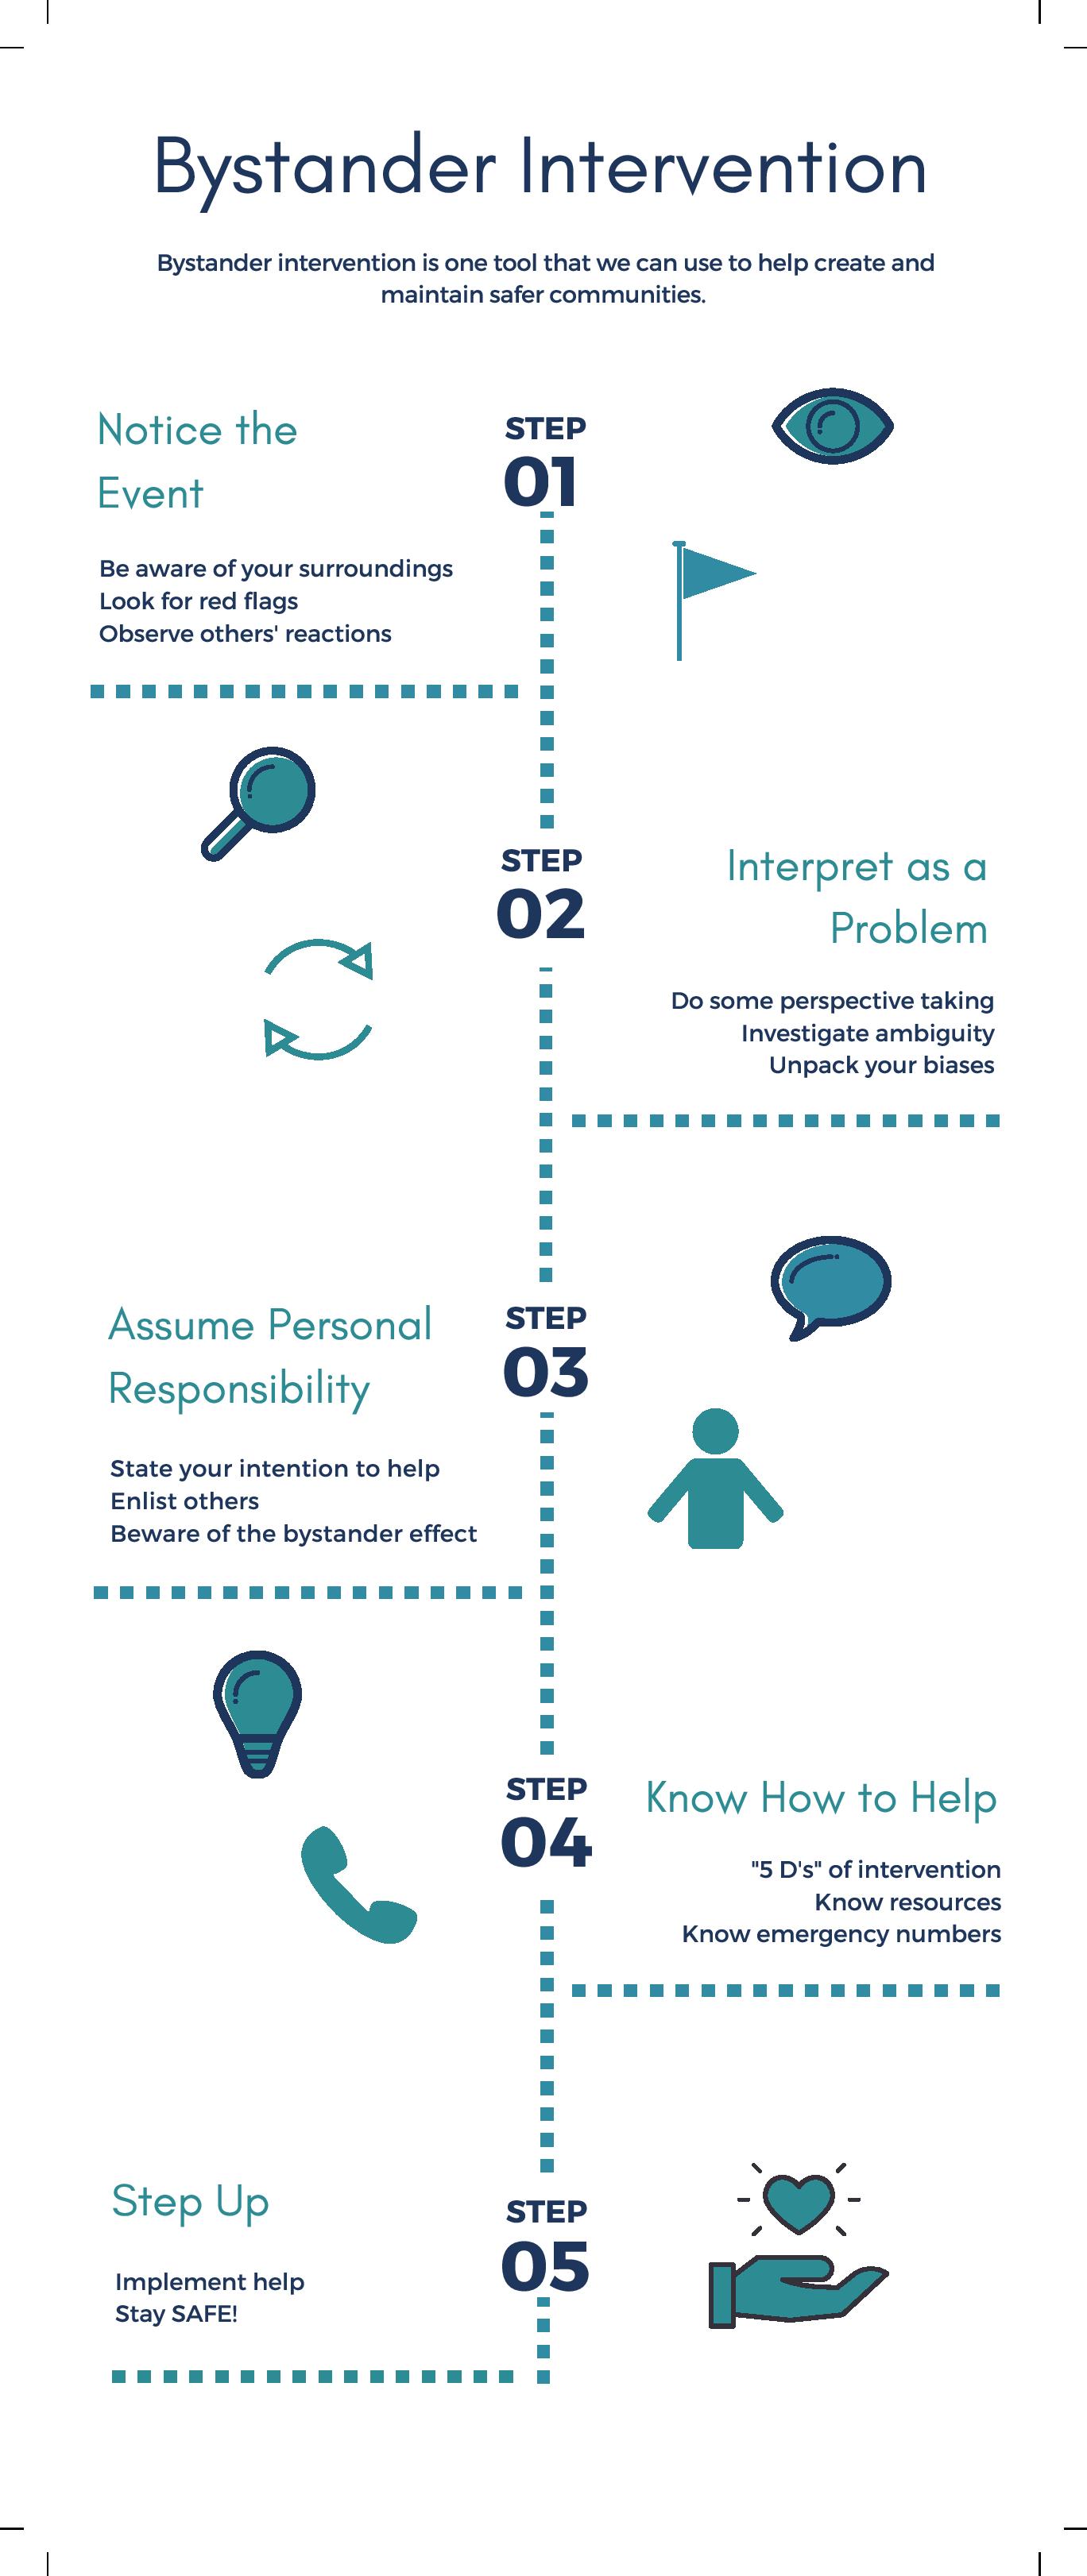 Blue and White chart showing the 5 steps of Bystander Intervention - Notice the Event, Interpret the Event as a Problem, Assume Personal Responsibility, Know How to Help, Step Up